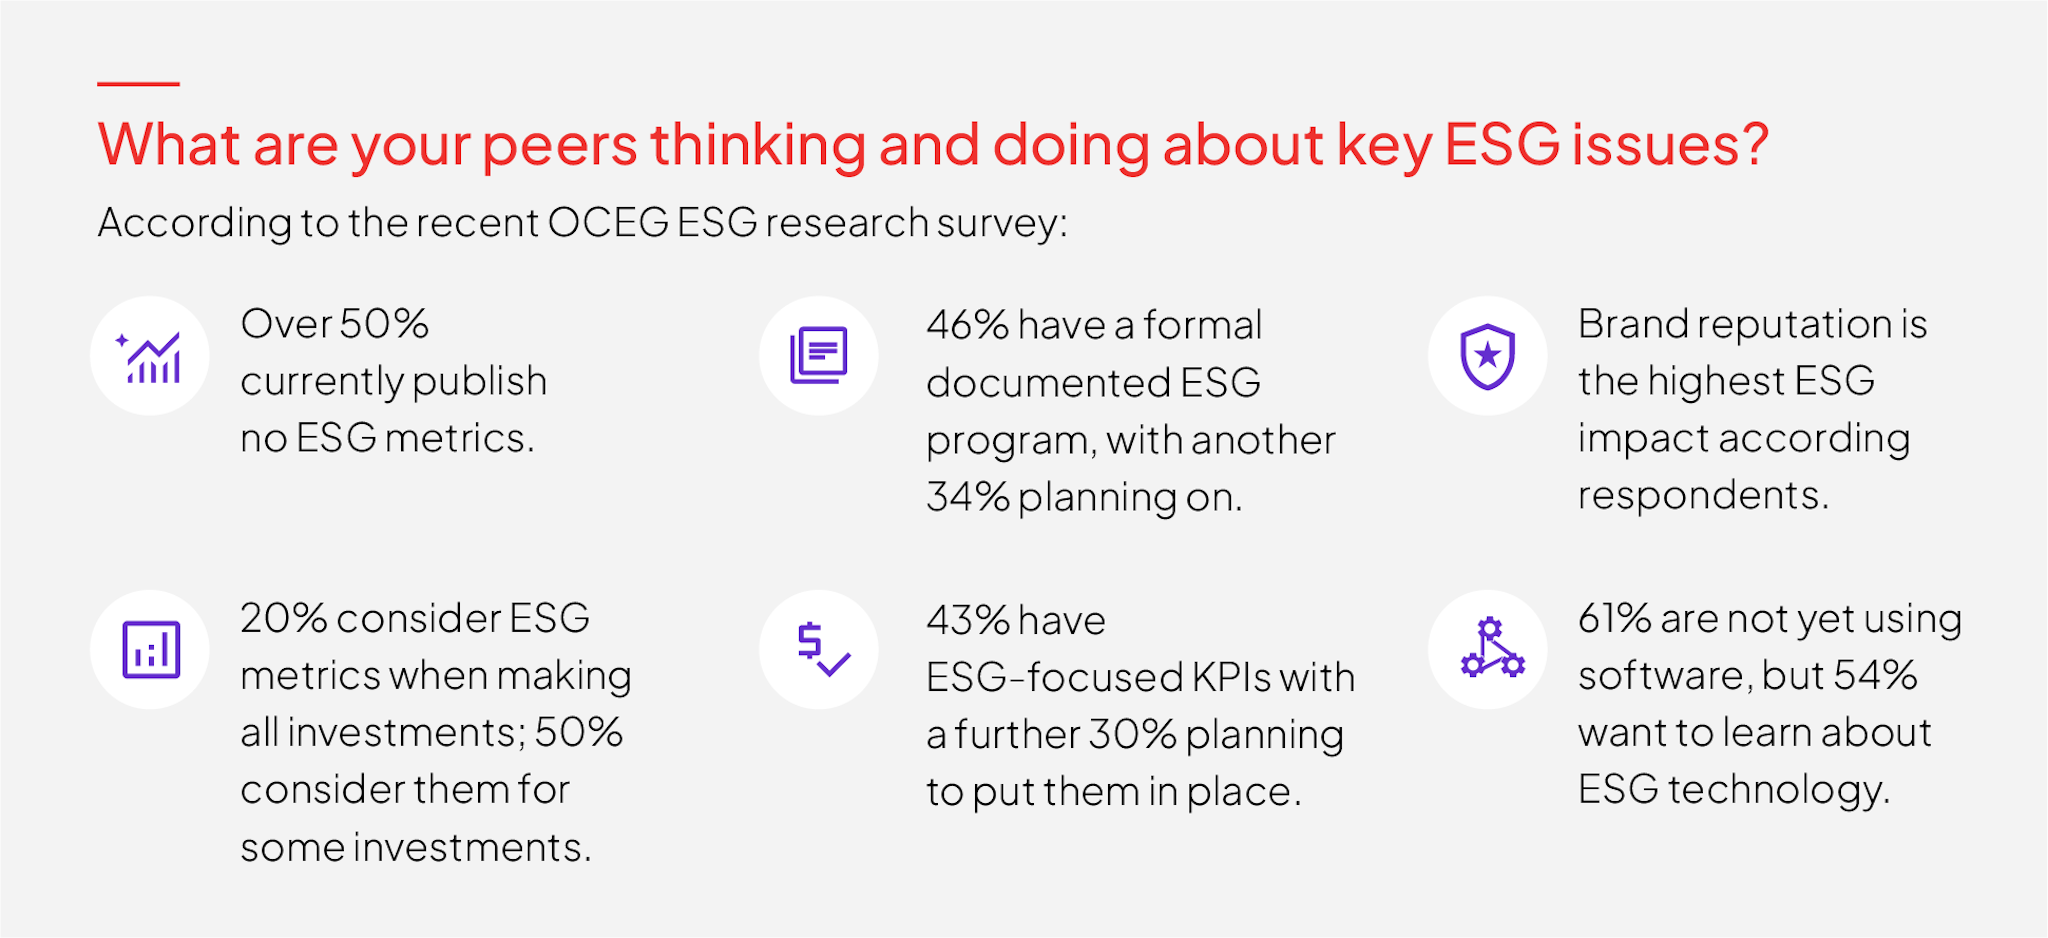 What are your peers thinking and doing about key issues. Graphic breaks down data visually, highlighting ESG trends from OCEG research survey.